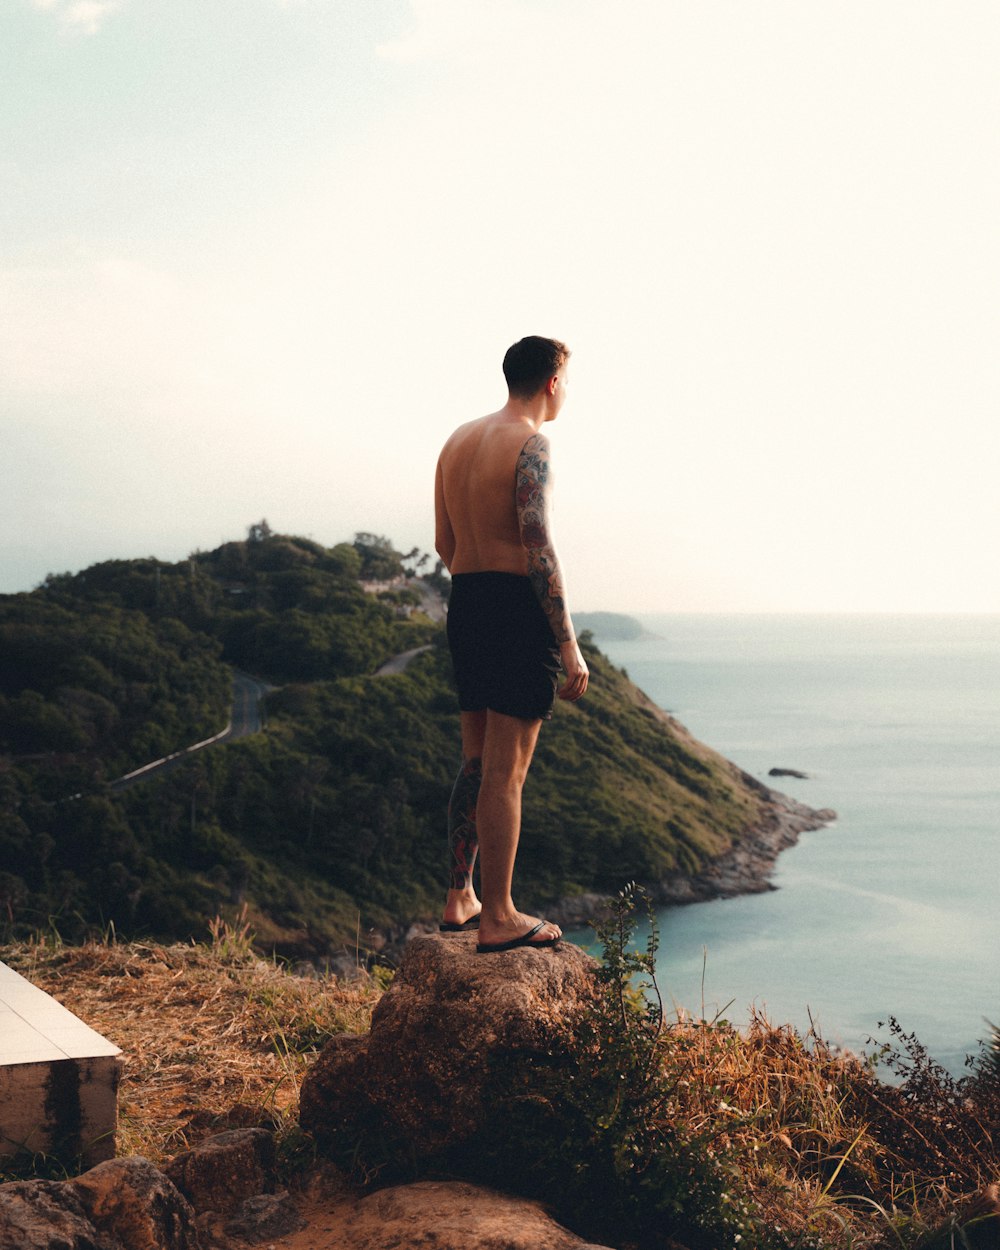 man in black shorts standing on brown rock near body of water during daytime